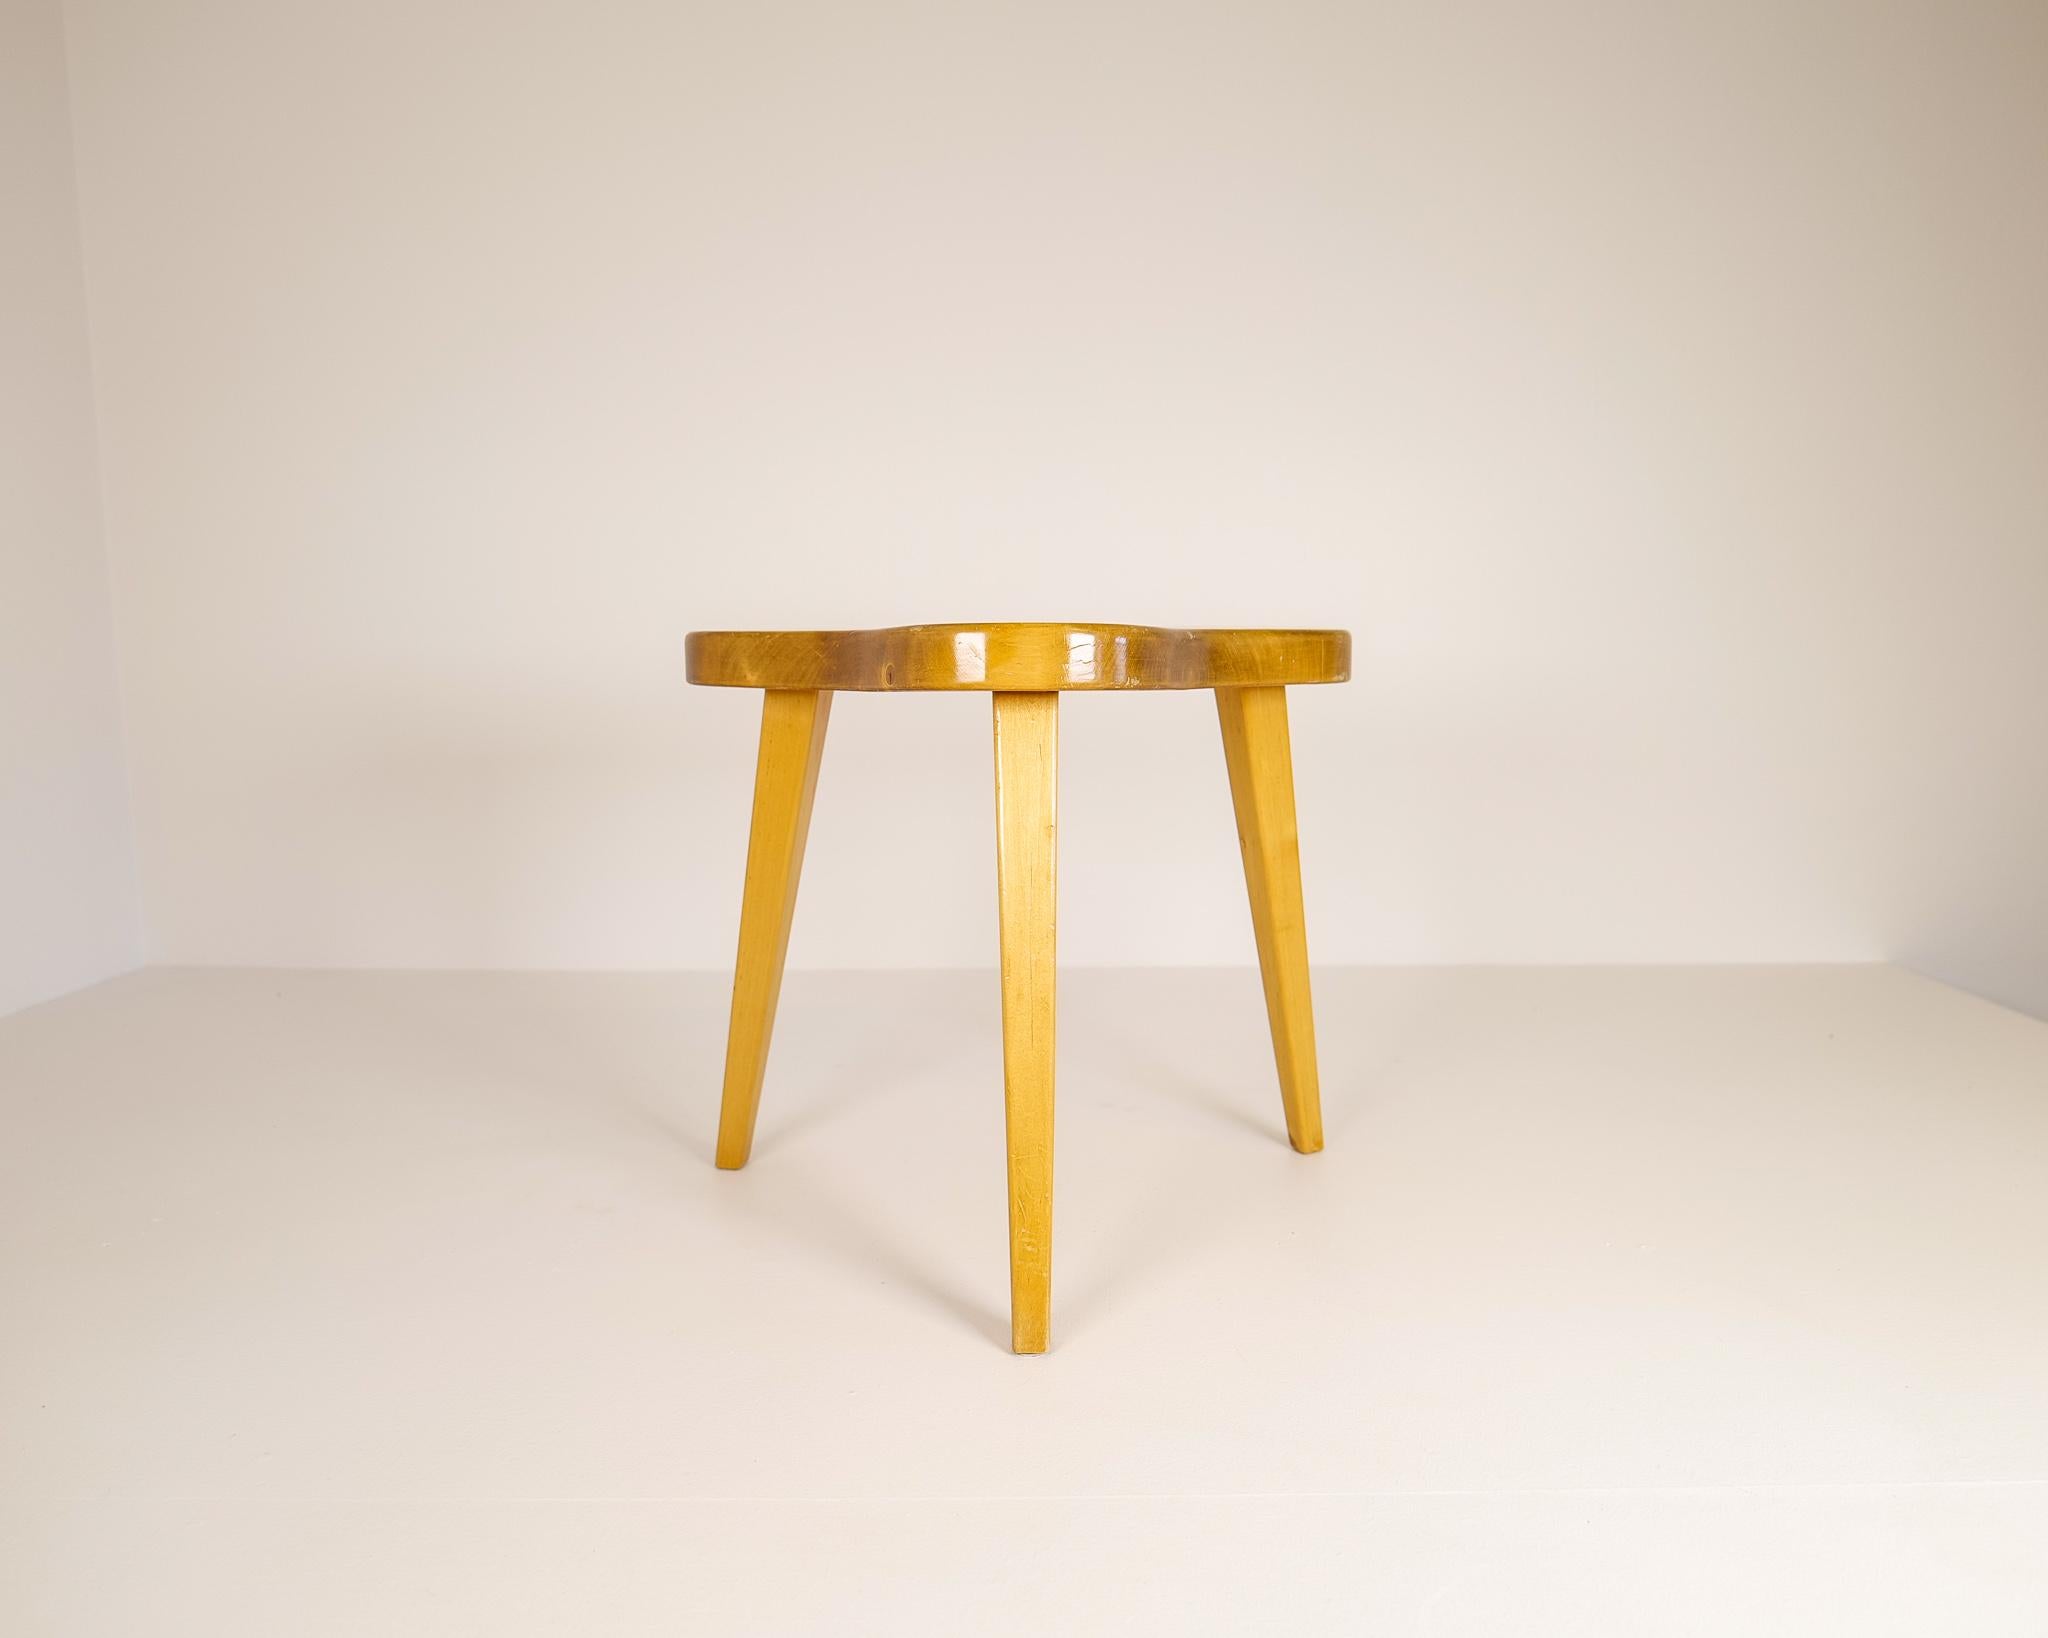 Late 20th Century Scandinavien Modern Swedish Stool in Lacquered Birch, 1970s For Sale